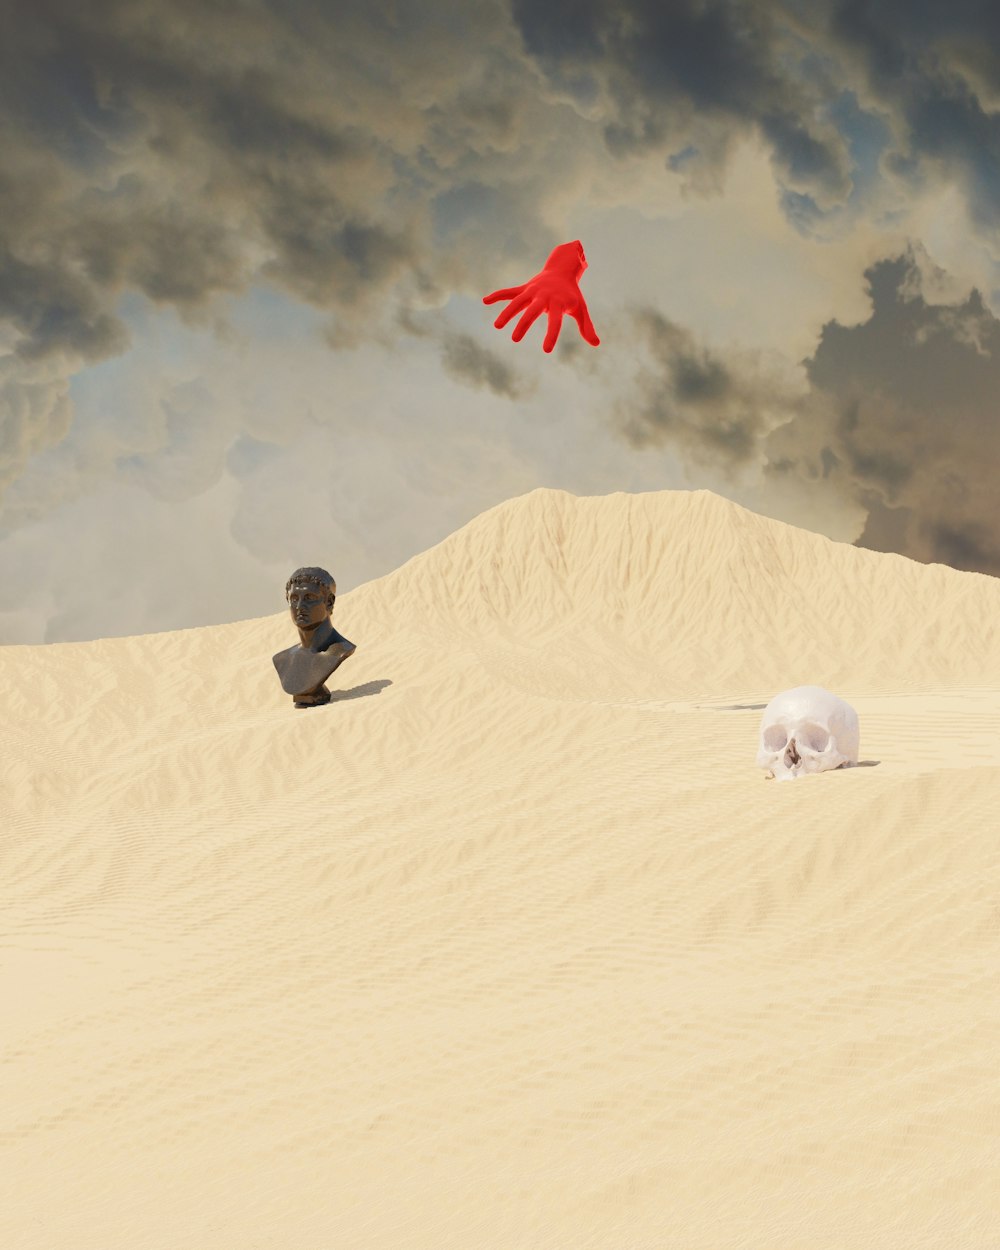 a person sitting in the sand with a red object in the sky